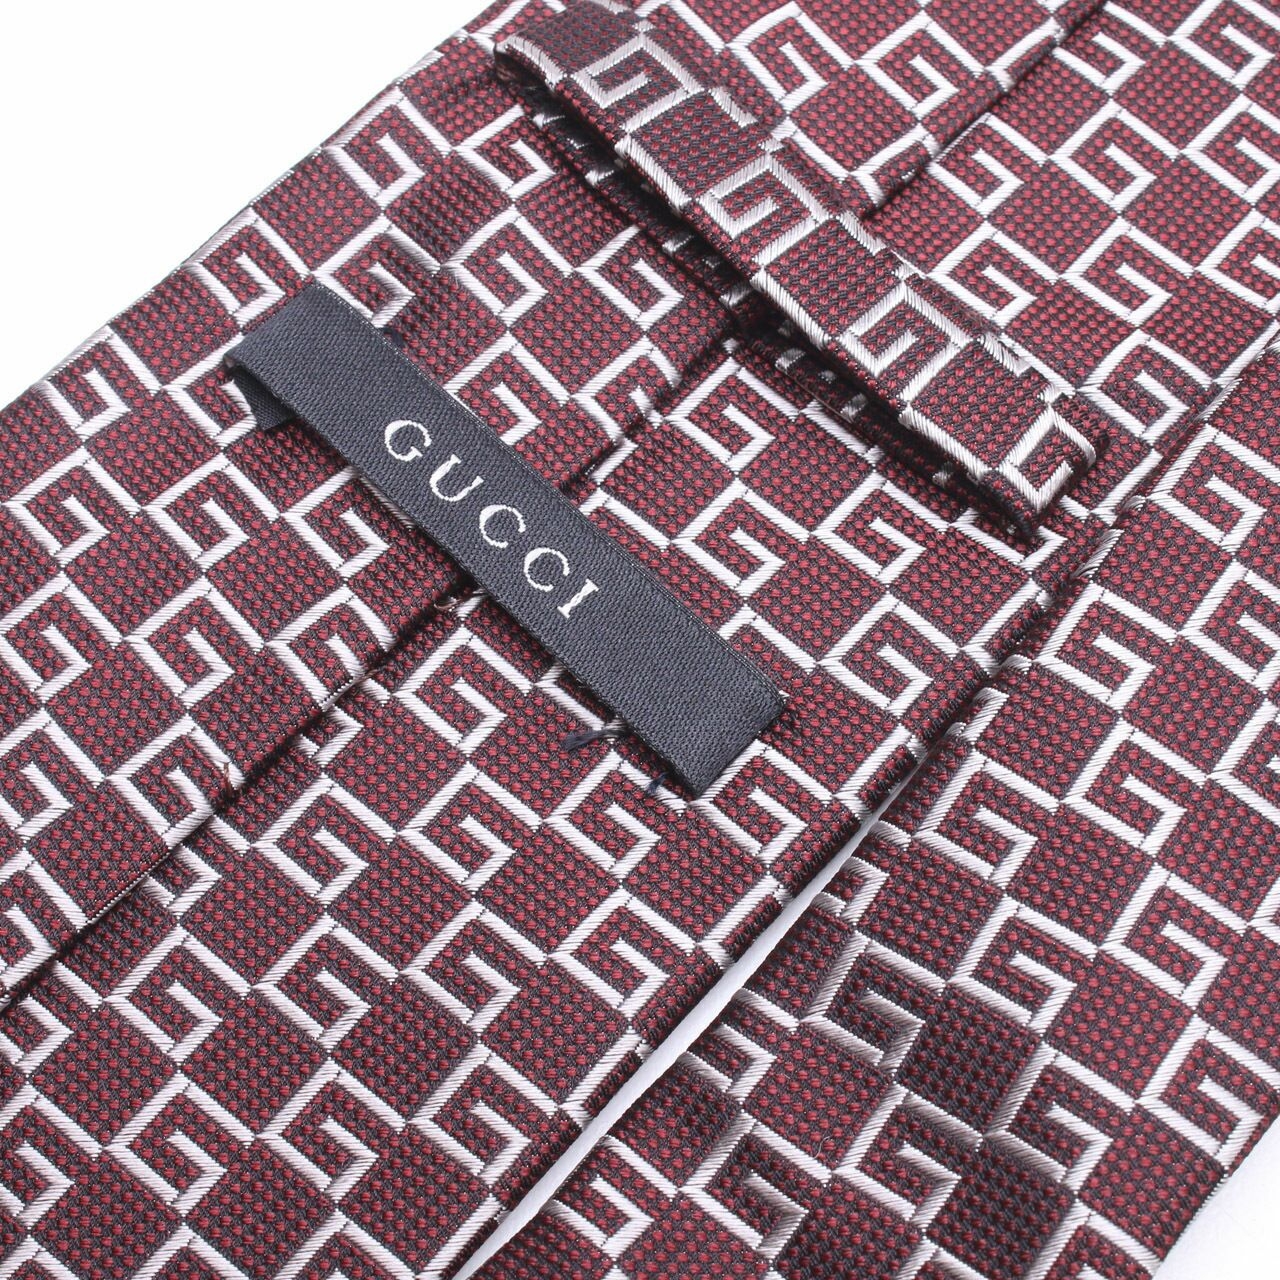 Gucci Maroon Patterned Tie